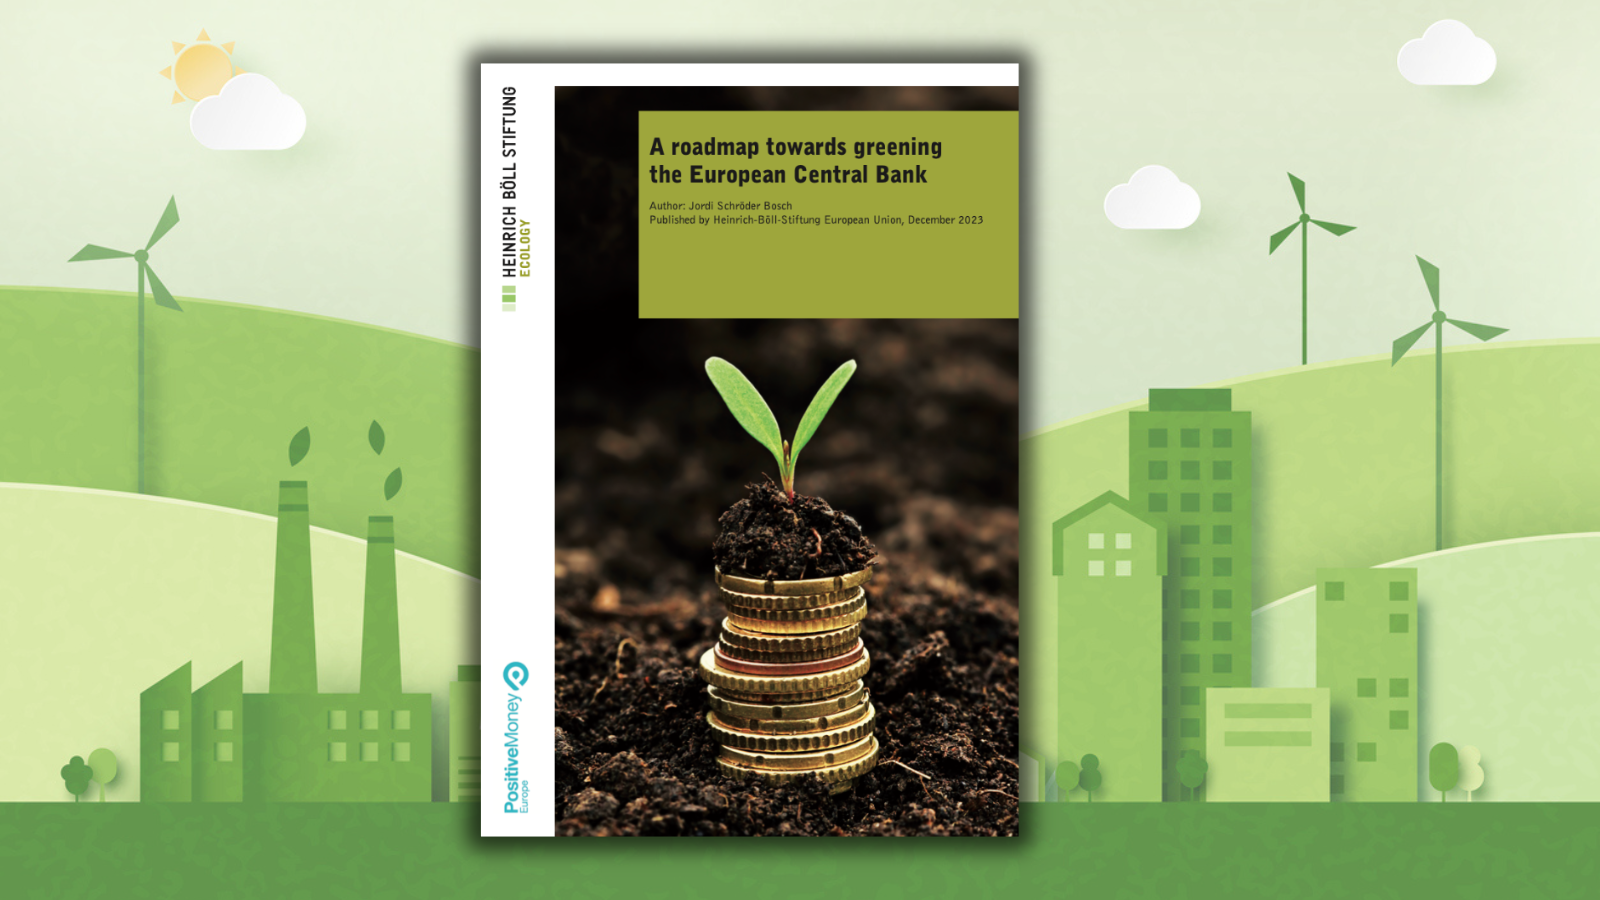 Renewables in background with a report on greening the ECB